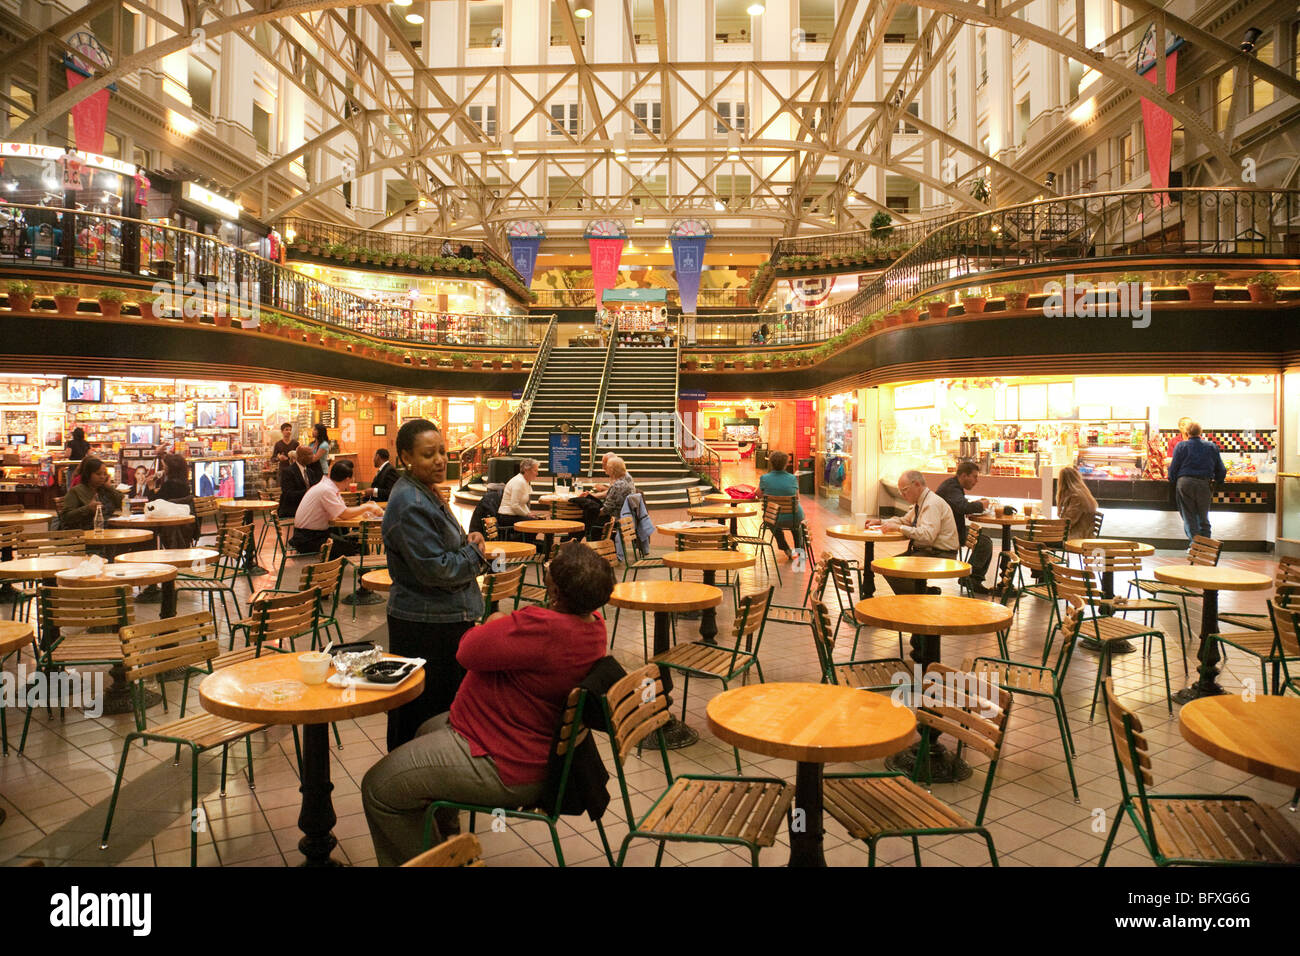 Tourists eating in the cafe in the Old Post Office building, Pennsylvania Avenue, Washington DC USA Stock Photo